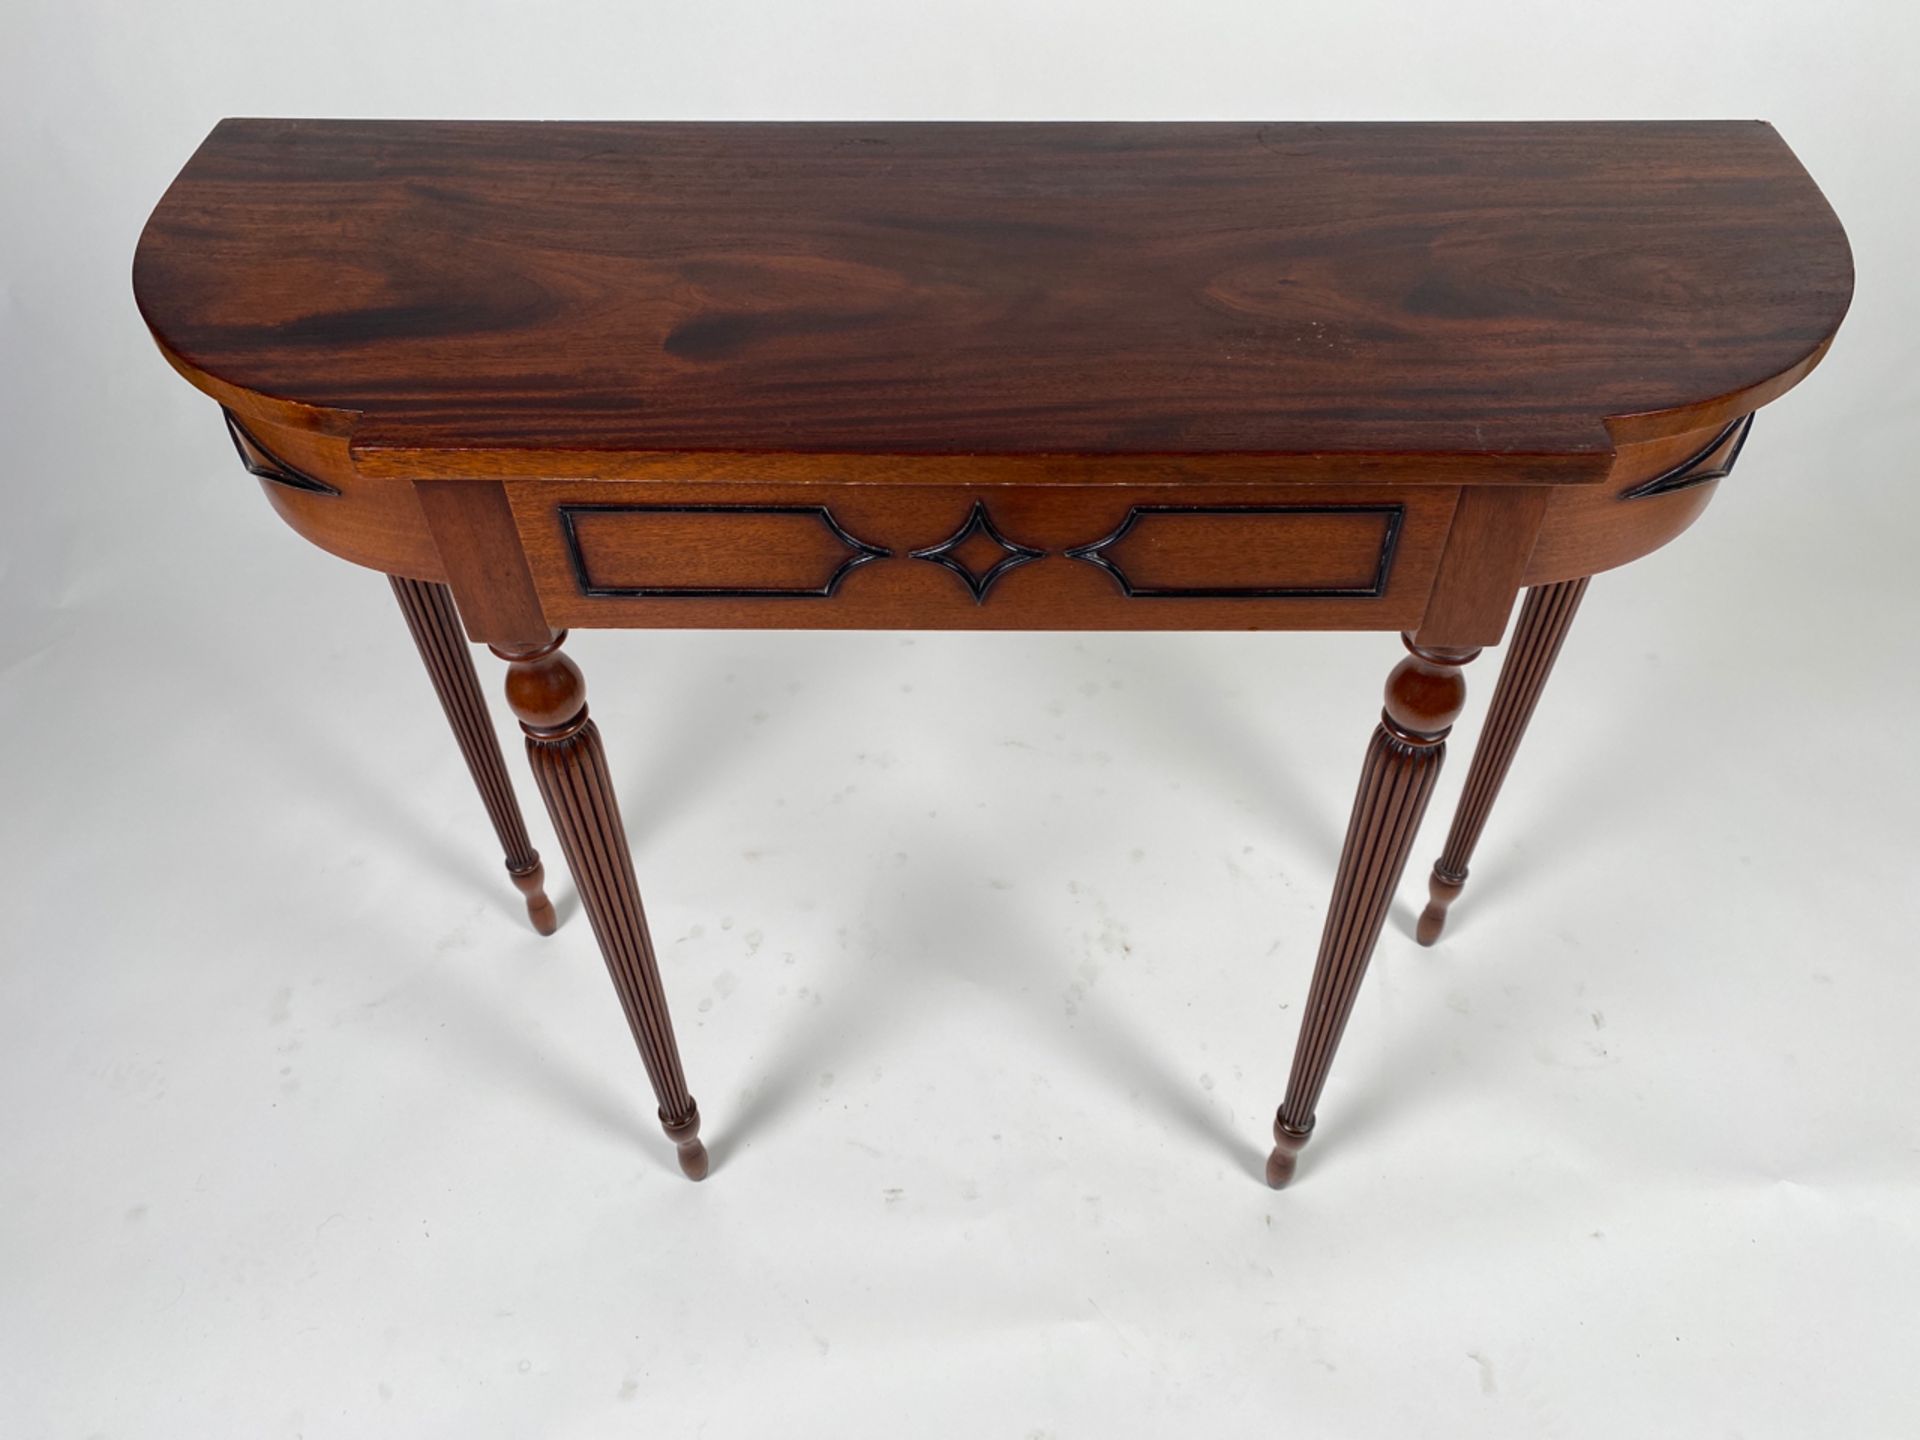 Antique Mahogany Console Table - Image 2 of 4